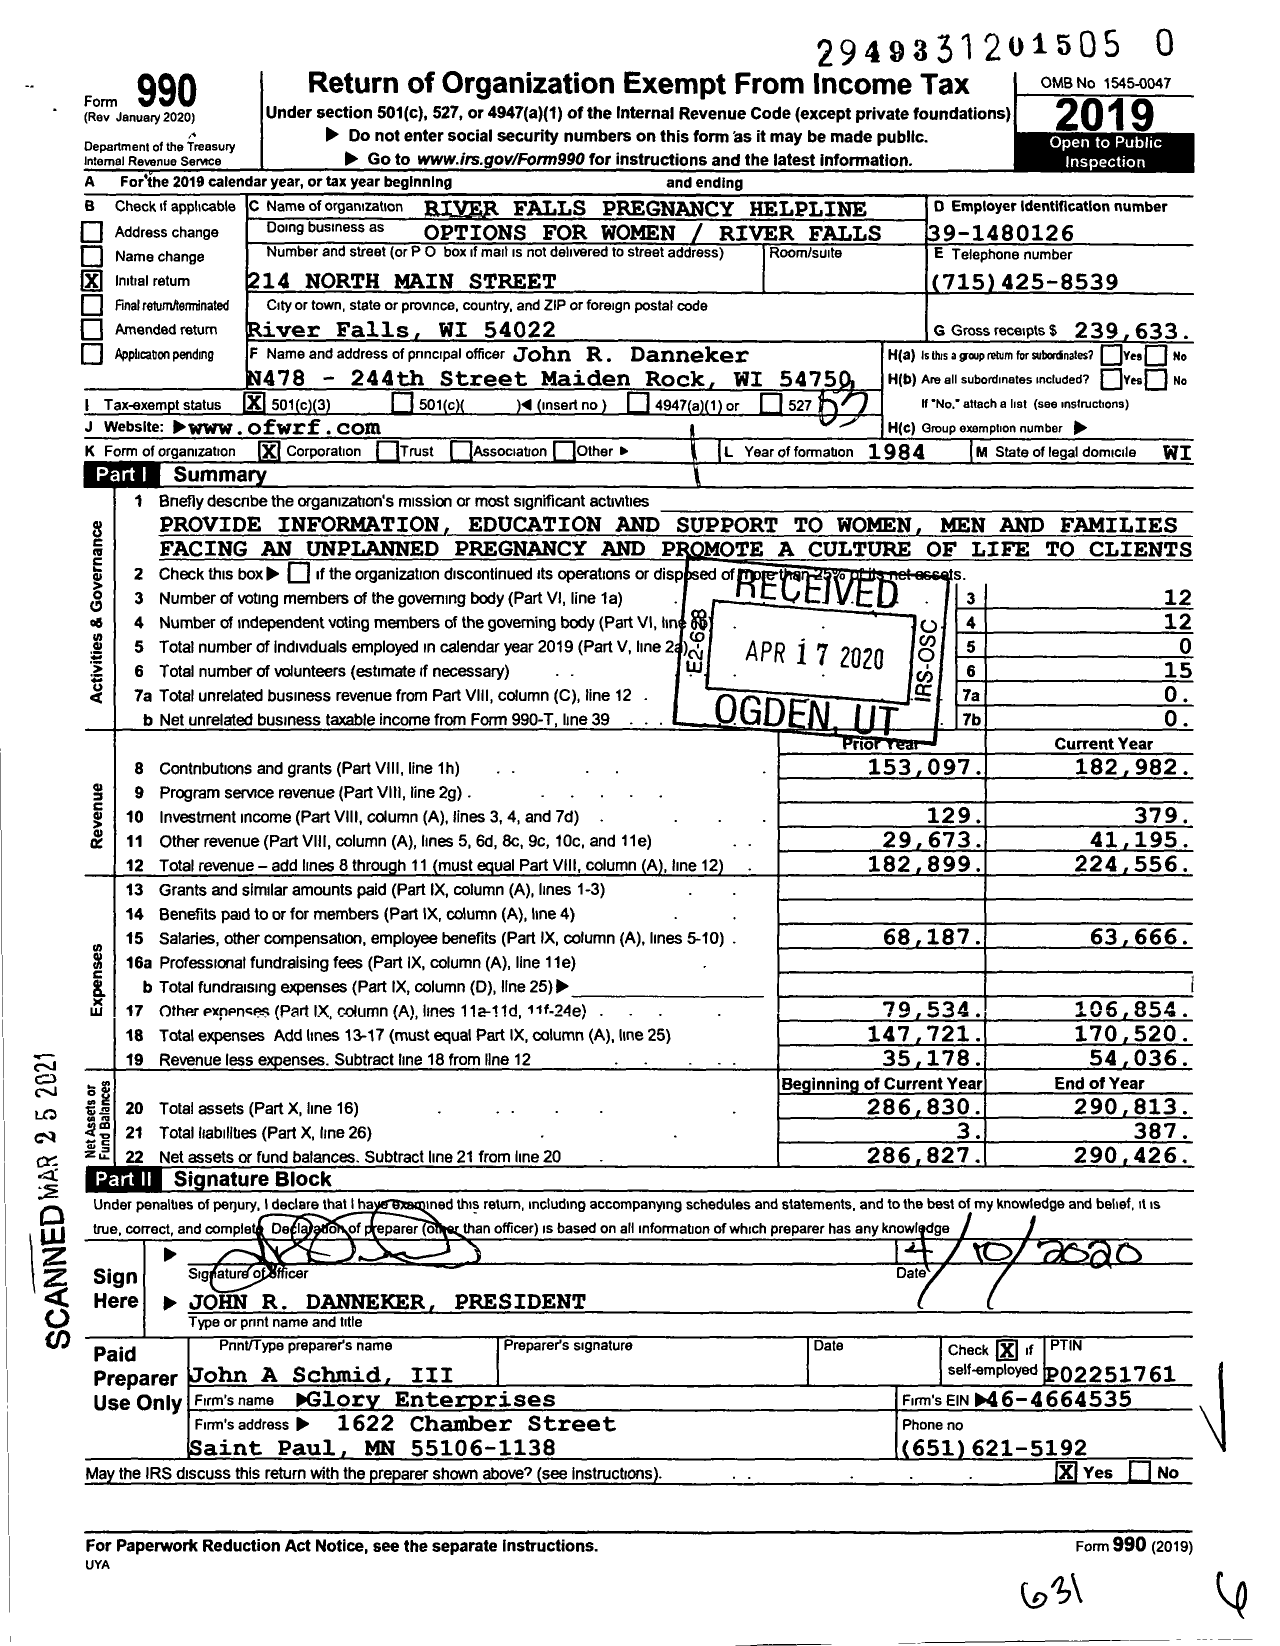 Image of first page of 2019 Form 990 for Options for Women River Falls